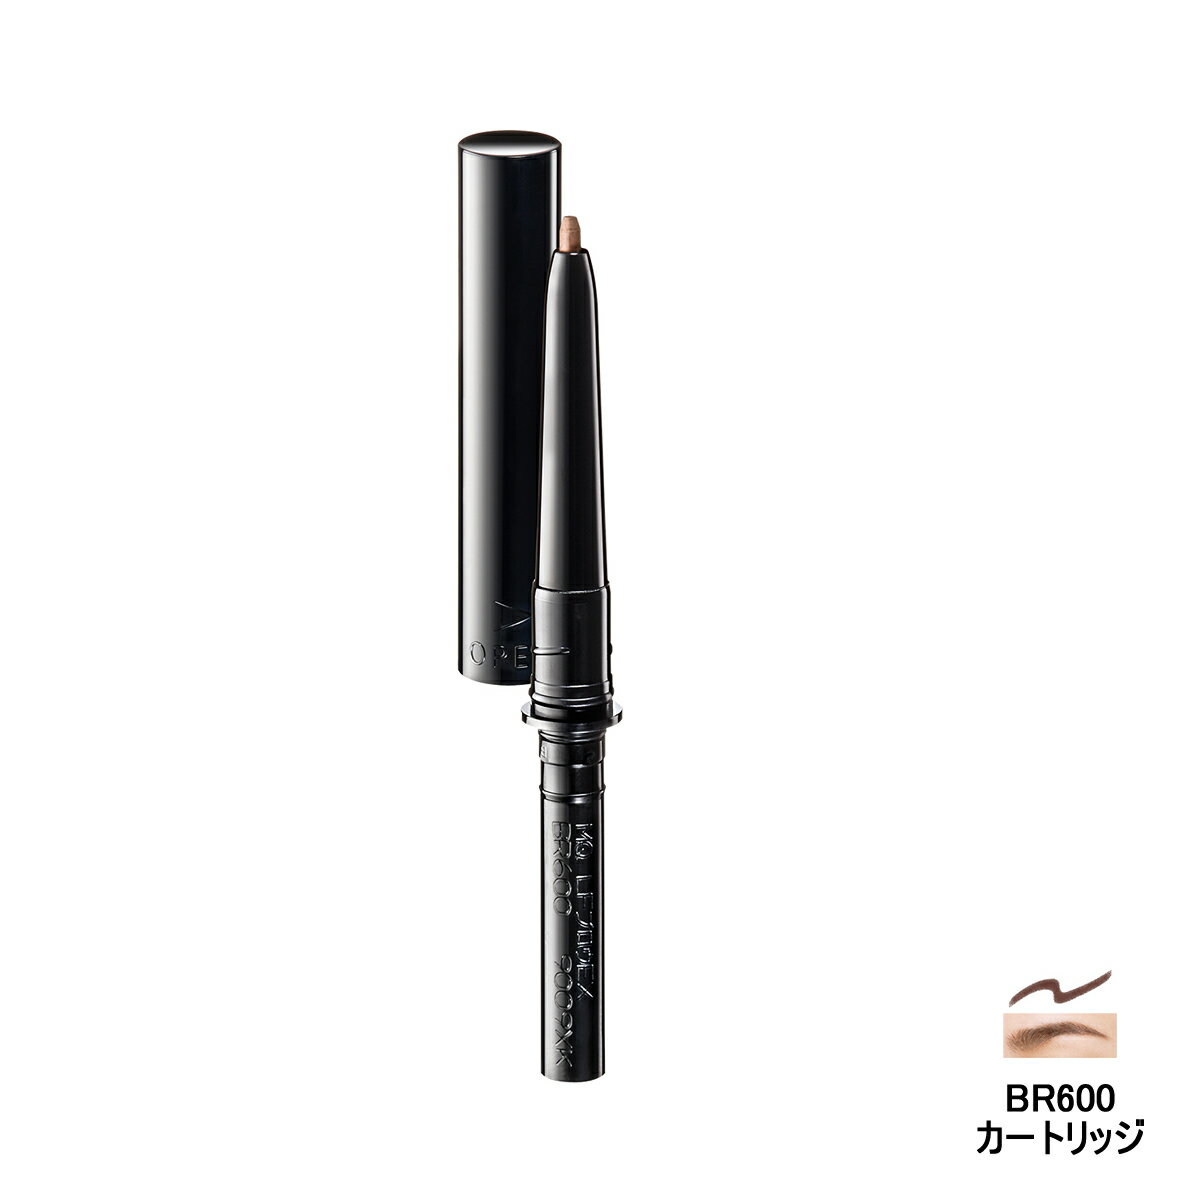 ڤڡ Ʋ ޥ 饹ƥ󥰥ե֥EX BR600 ȥå 0.12g [ shiseido Maquill...